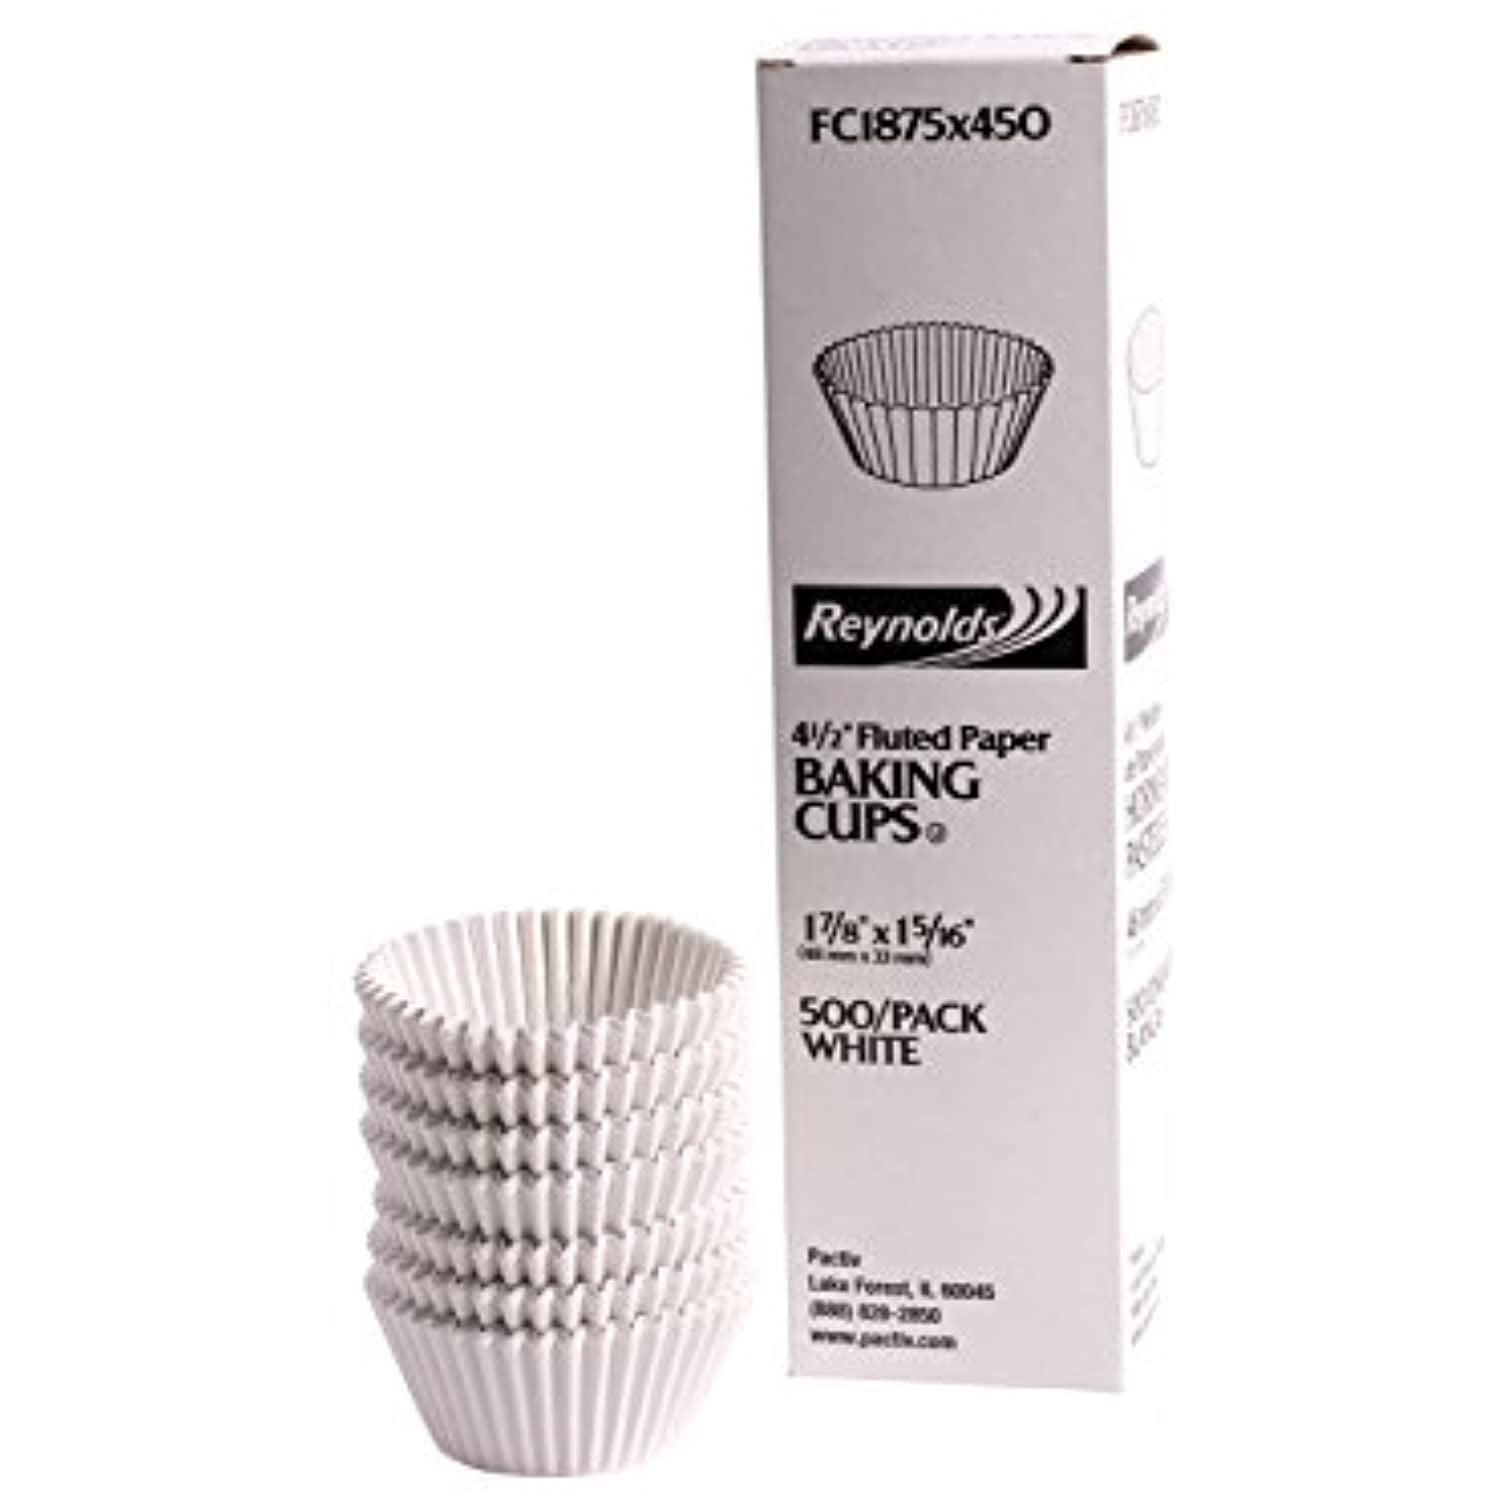 10M fluted paper FC1875X450 500 count White Round Baking Cup1-7/8X1-5/16 